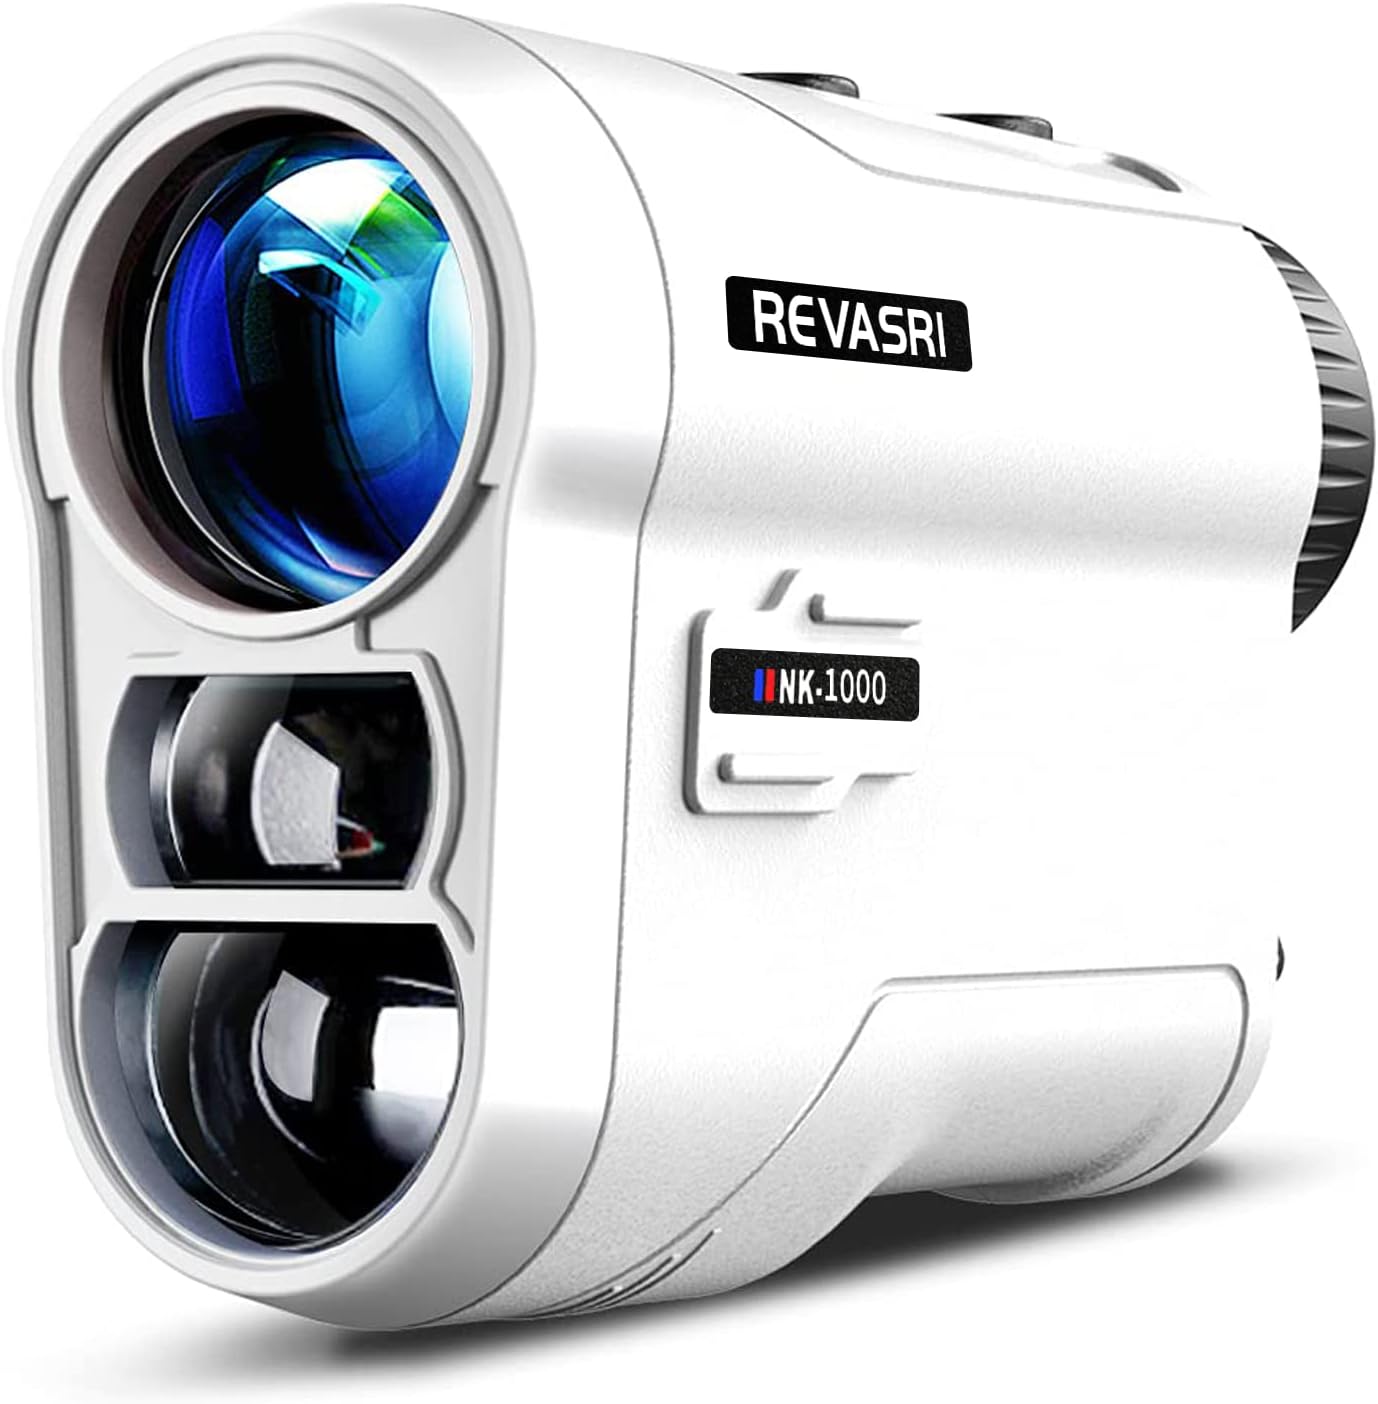 REVASRI Golf Rangefinder with Slope and Pin Lock Vibration, External Slope Switch for Golf Tournament Legal, Rangefinders with Rechargeable Battery 1000YDS Laser Range Finder